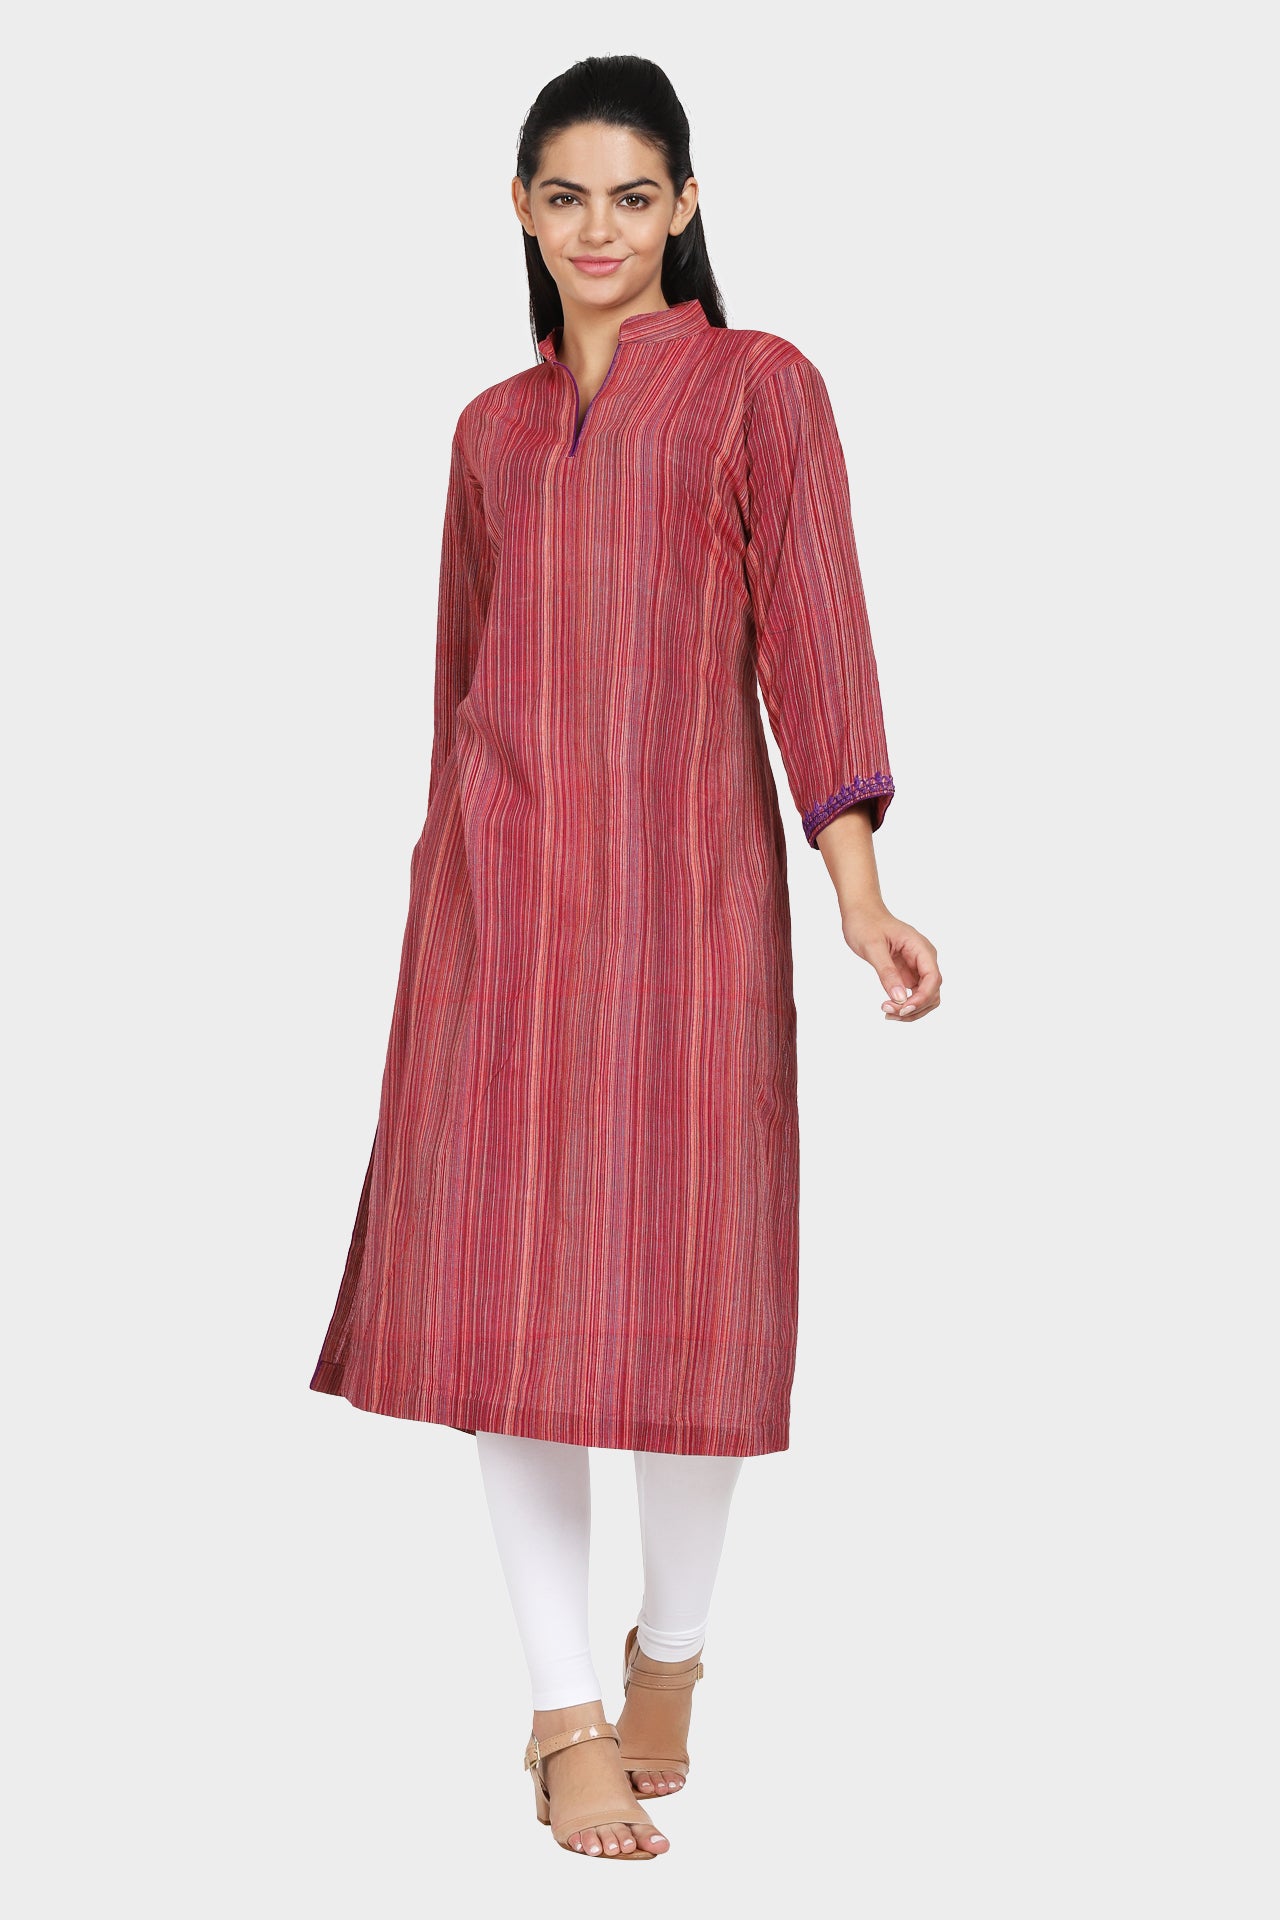 Maroon Abstract Pattern Cotton Kurta with Purple Embroidered Sleeves